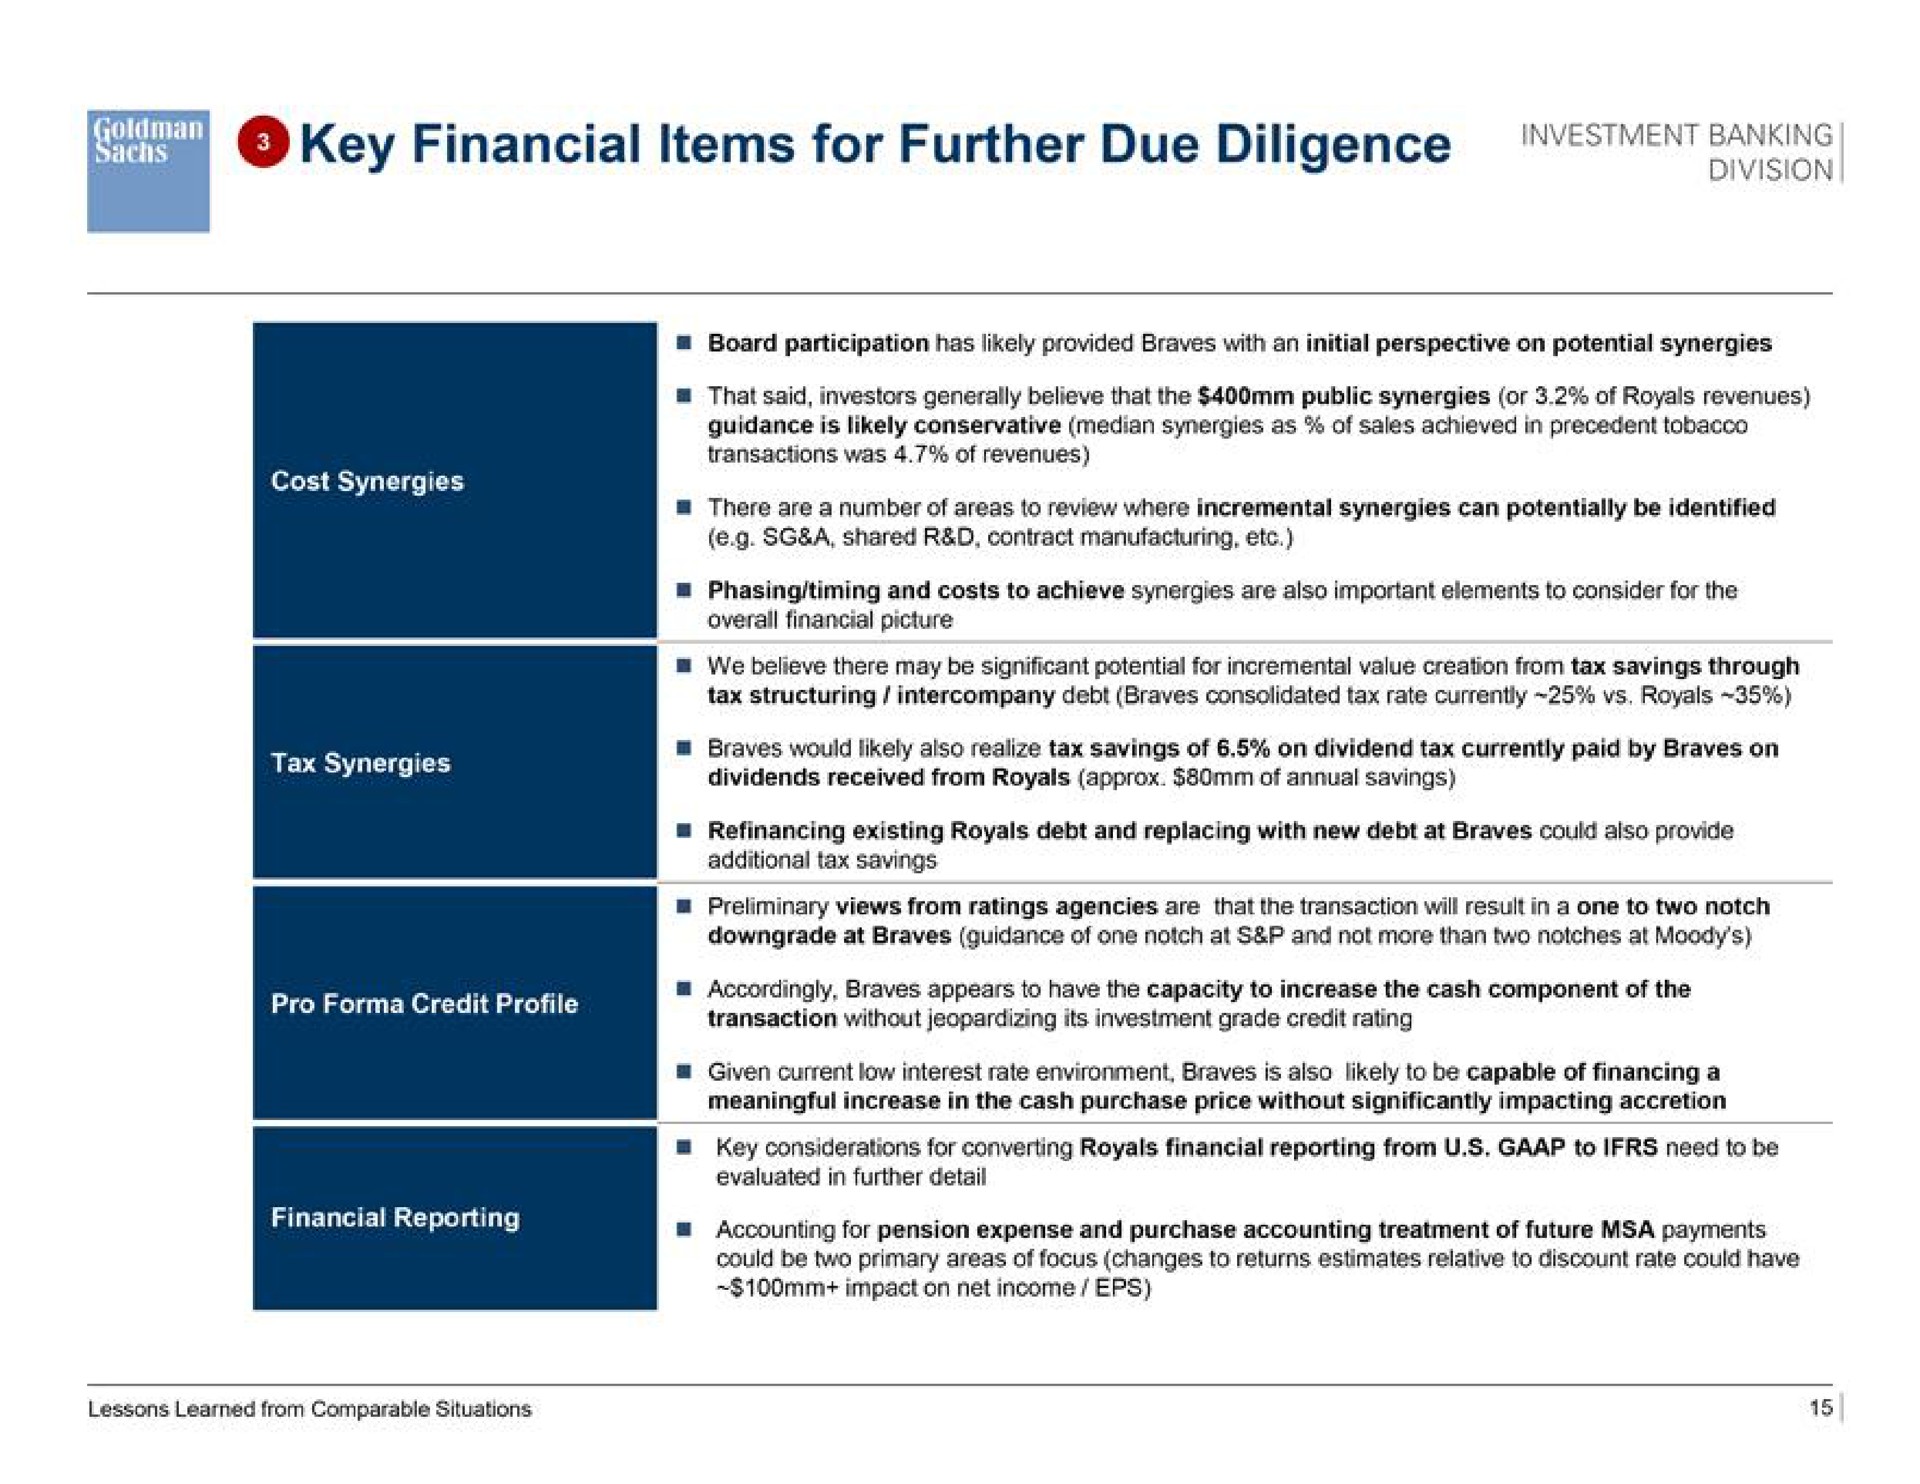 key financial items for further due diligence | Goldman Sachs